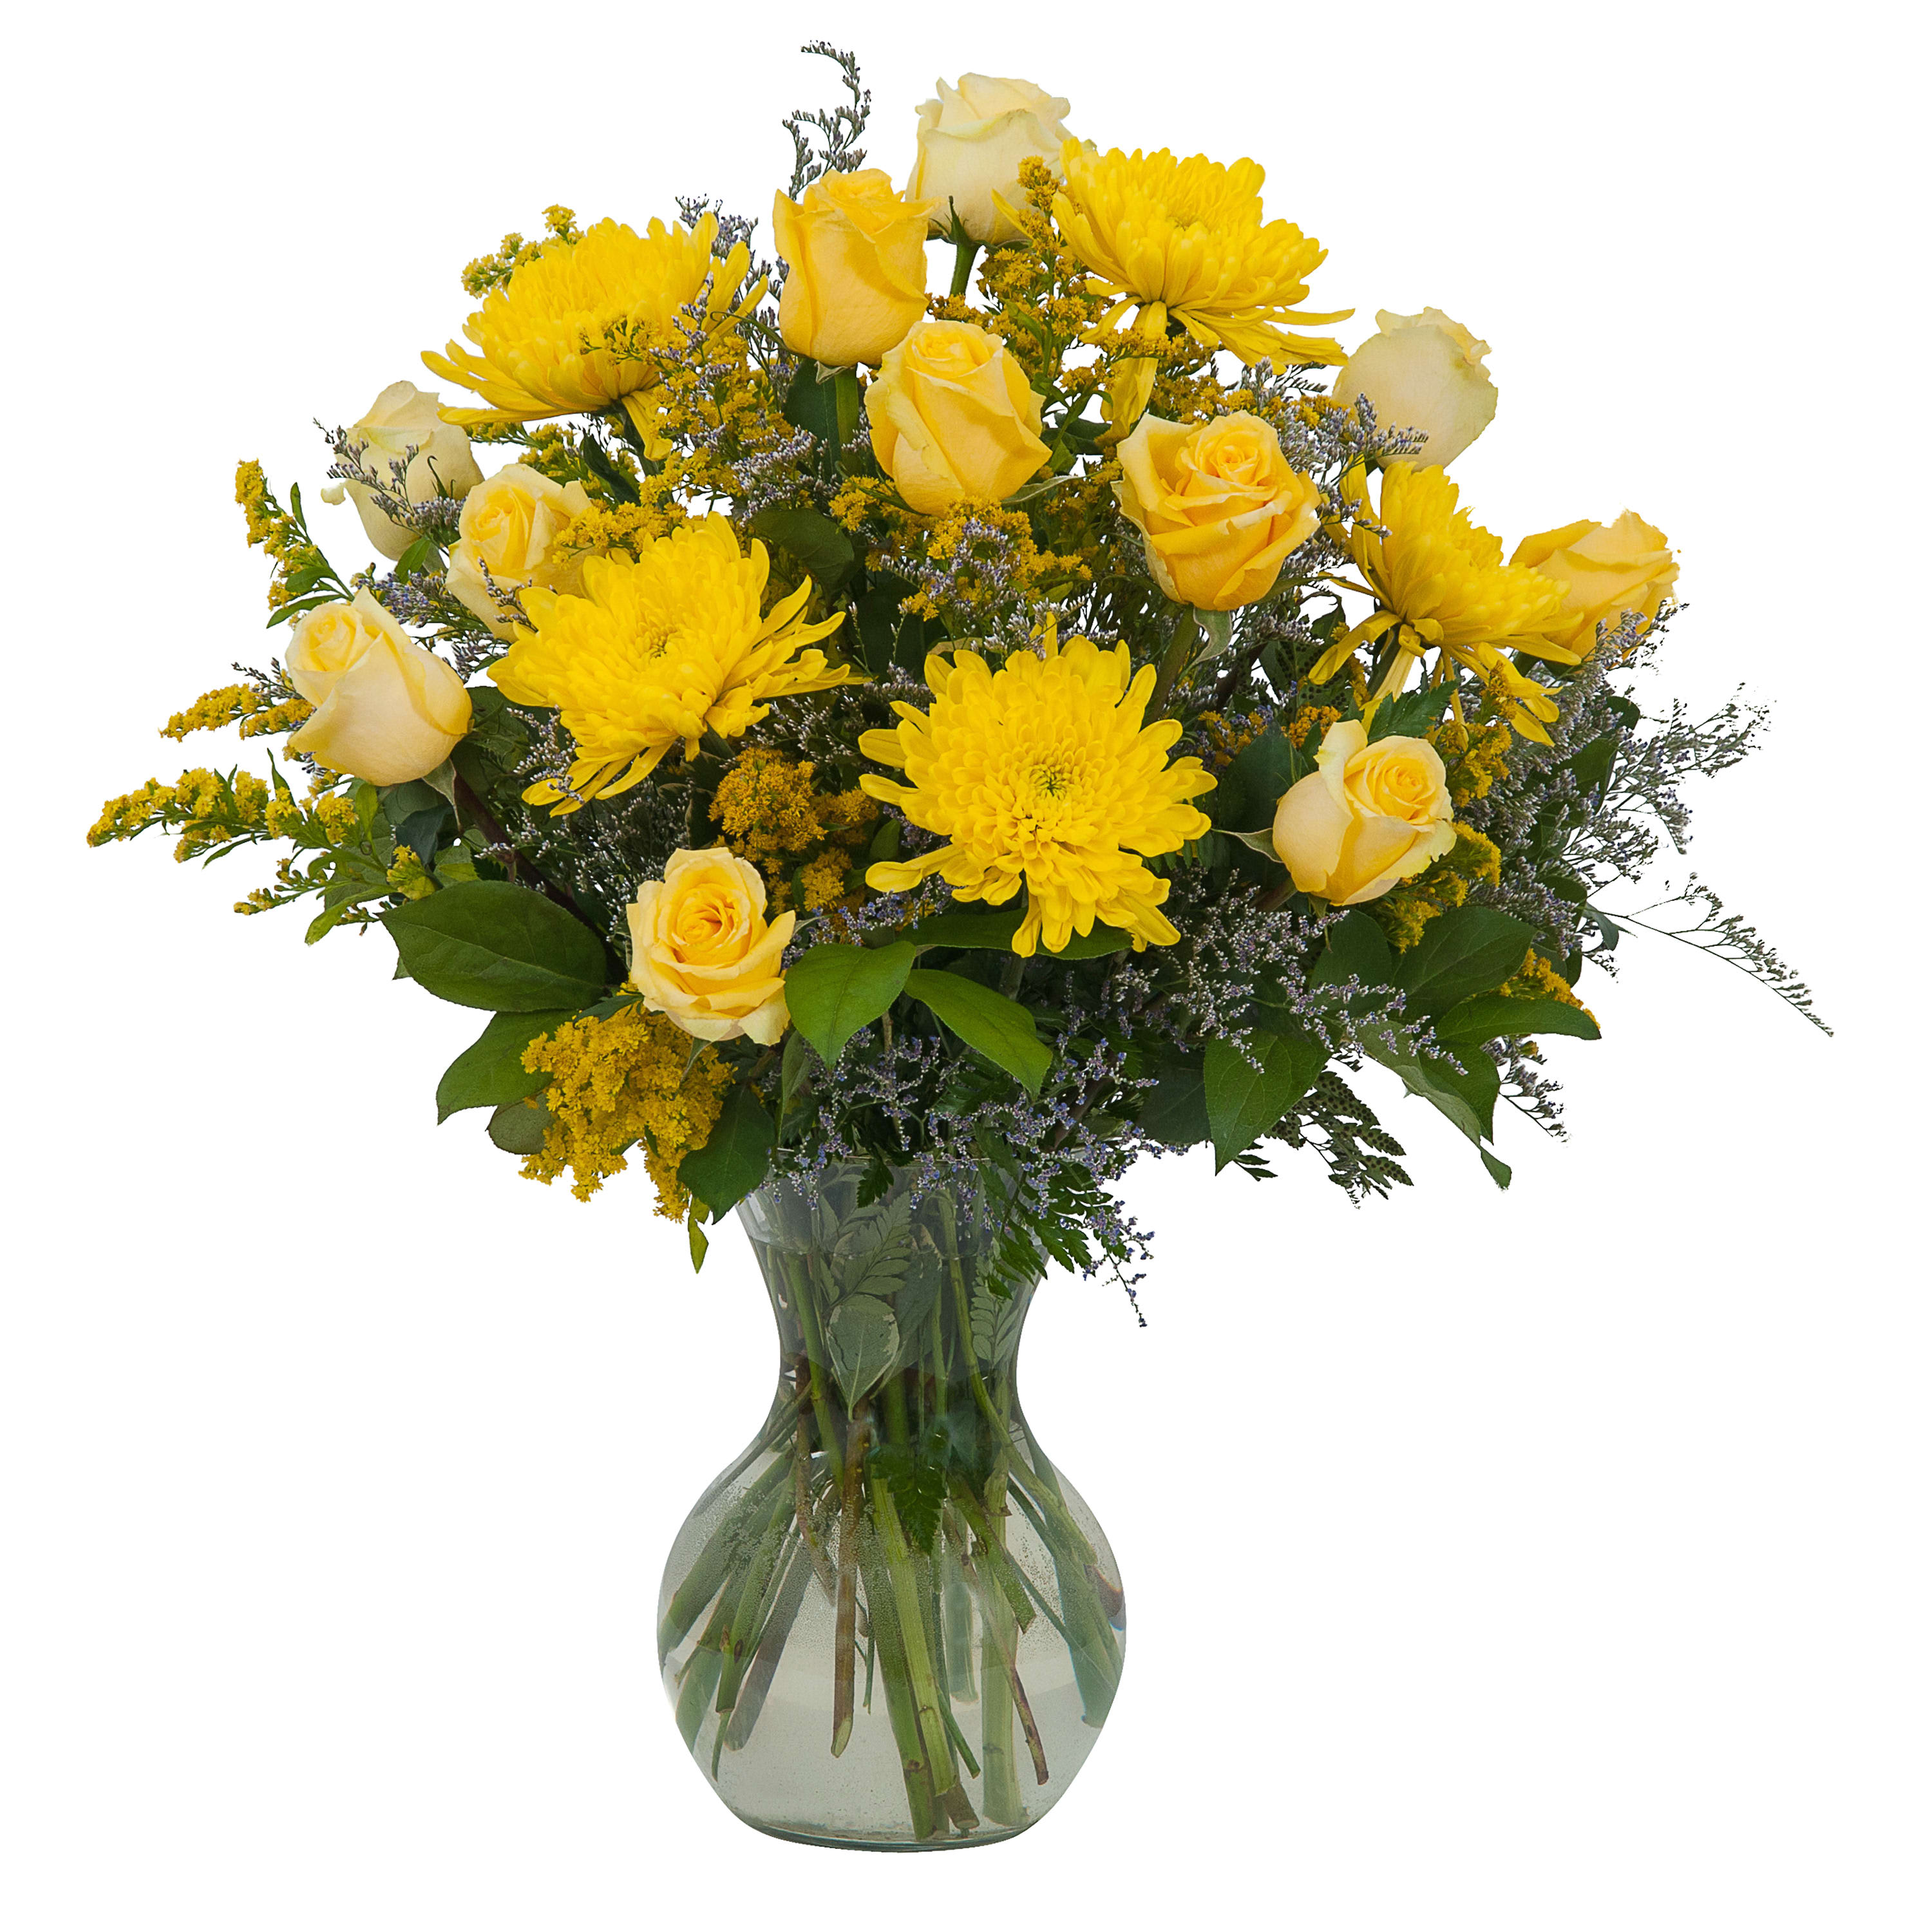 Roses and Sunshine - Yellow roses and yellow blooms combine to bring the feel of sunshine to this arrangement.TMF-604